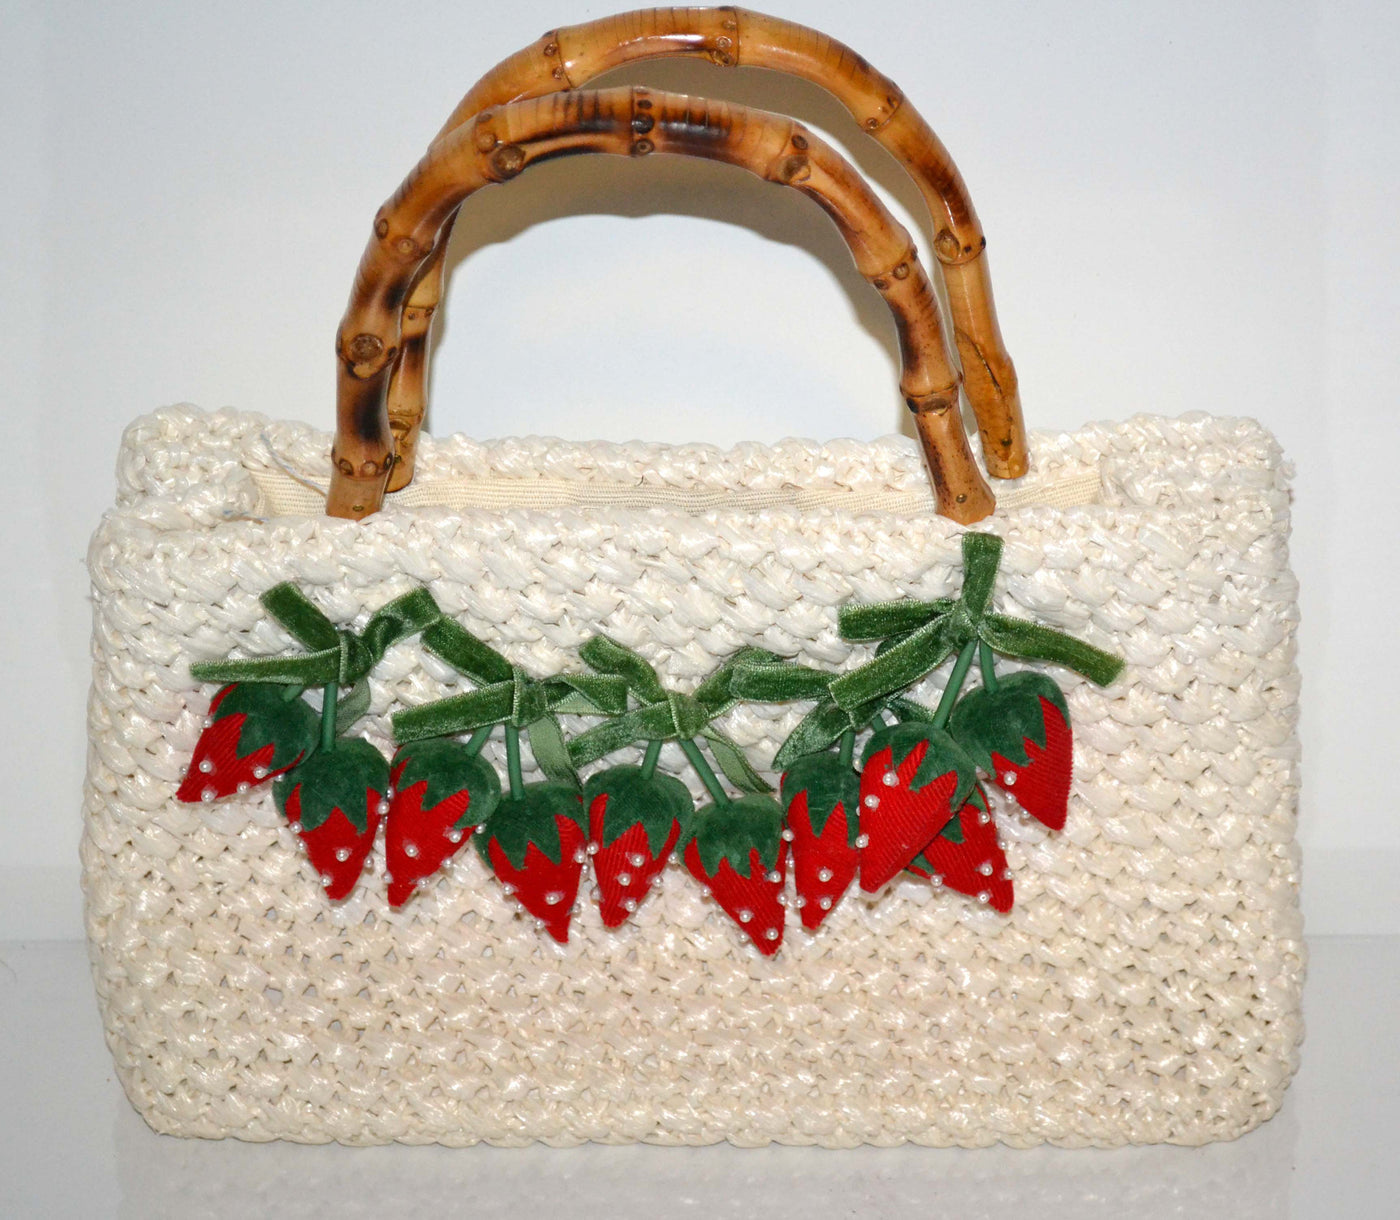 Vintage "It's In The Bag" For Ritter Strawberry Bamboo Handle Straw Purse